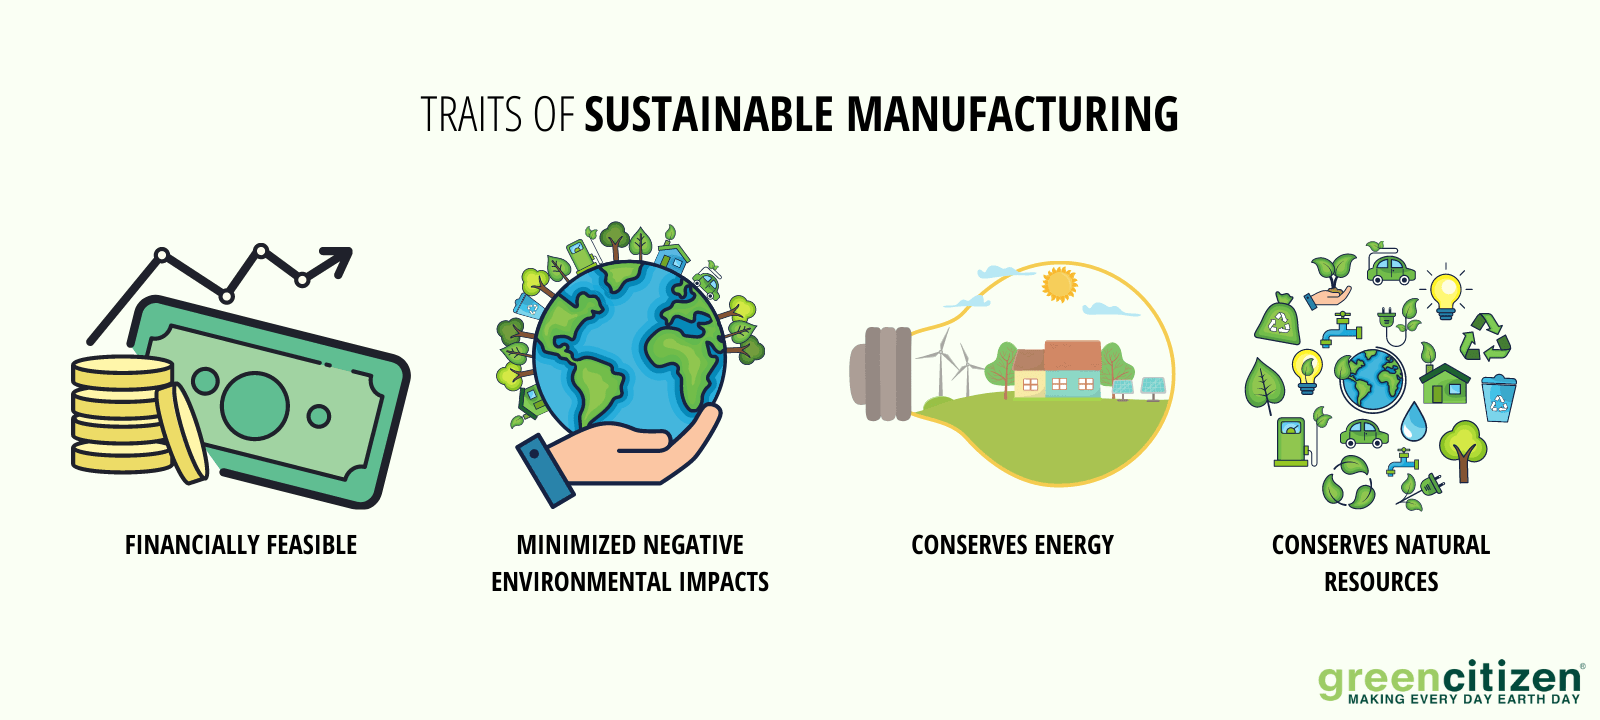 Traits of sustainable manufacturing